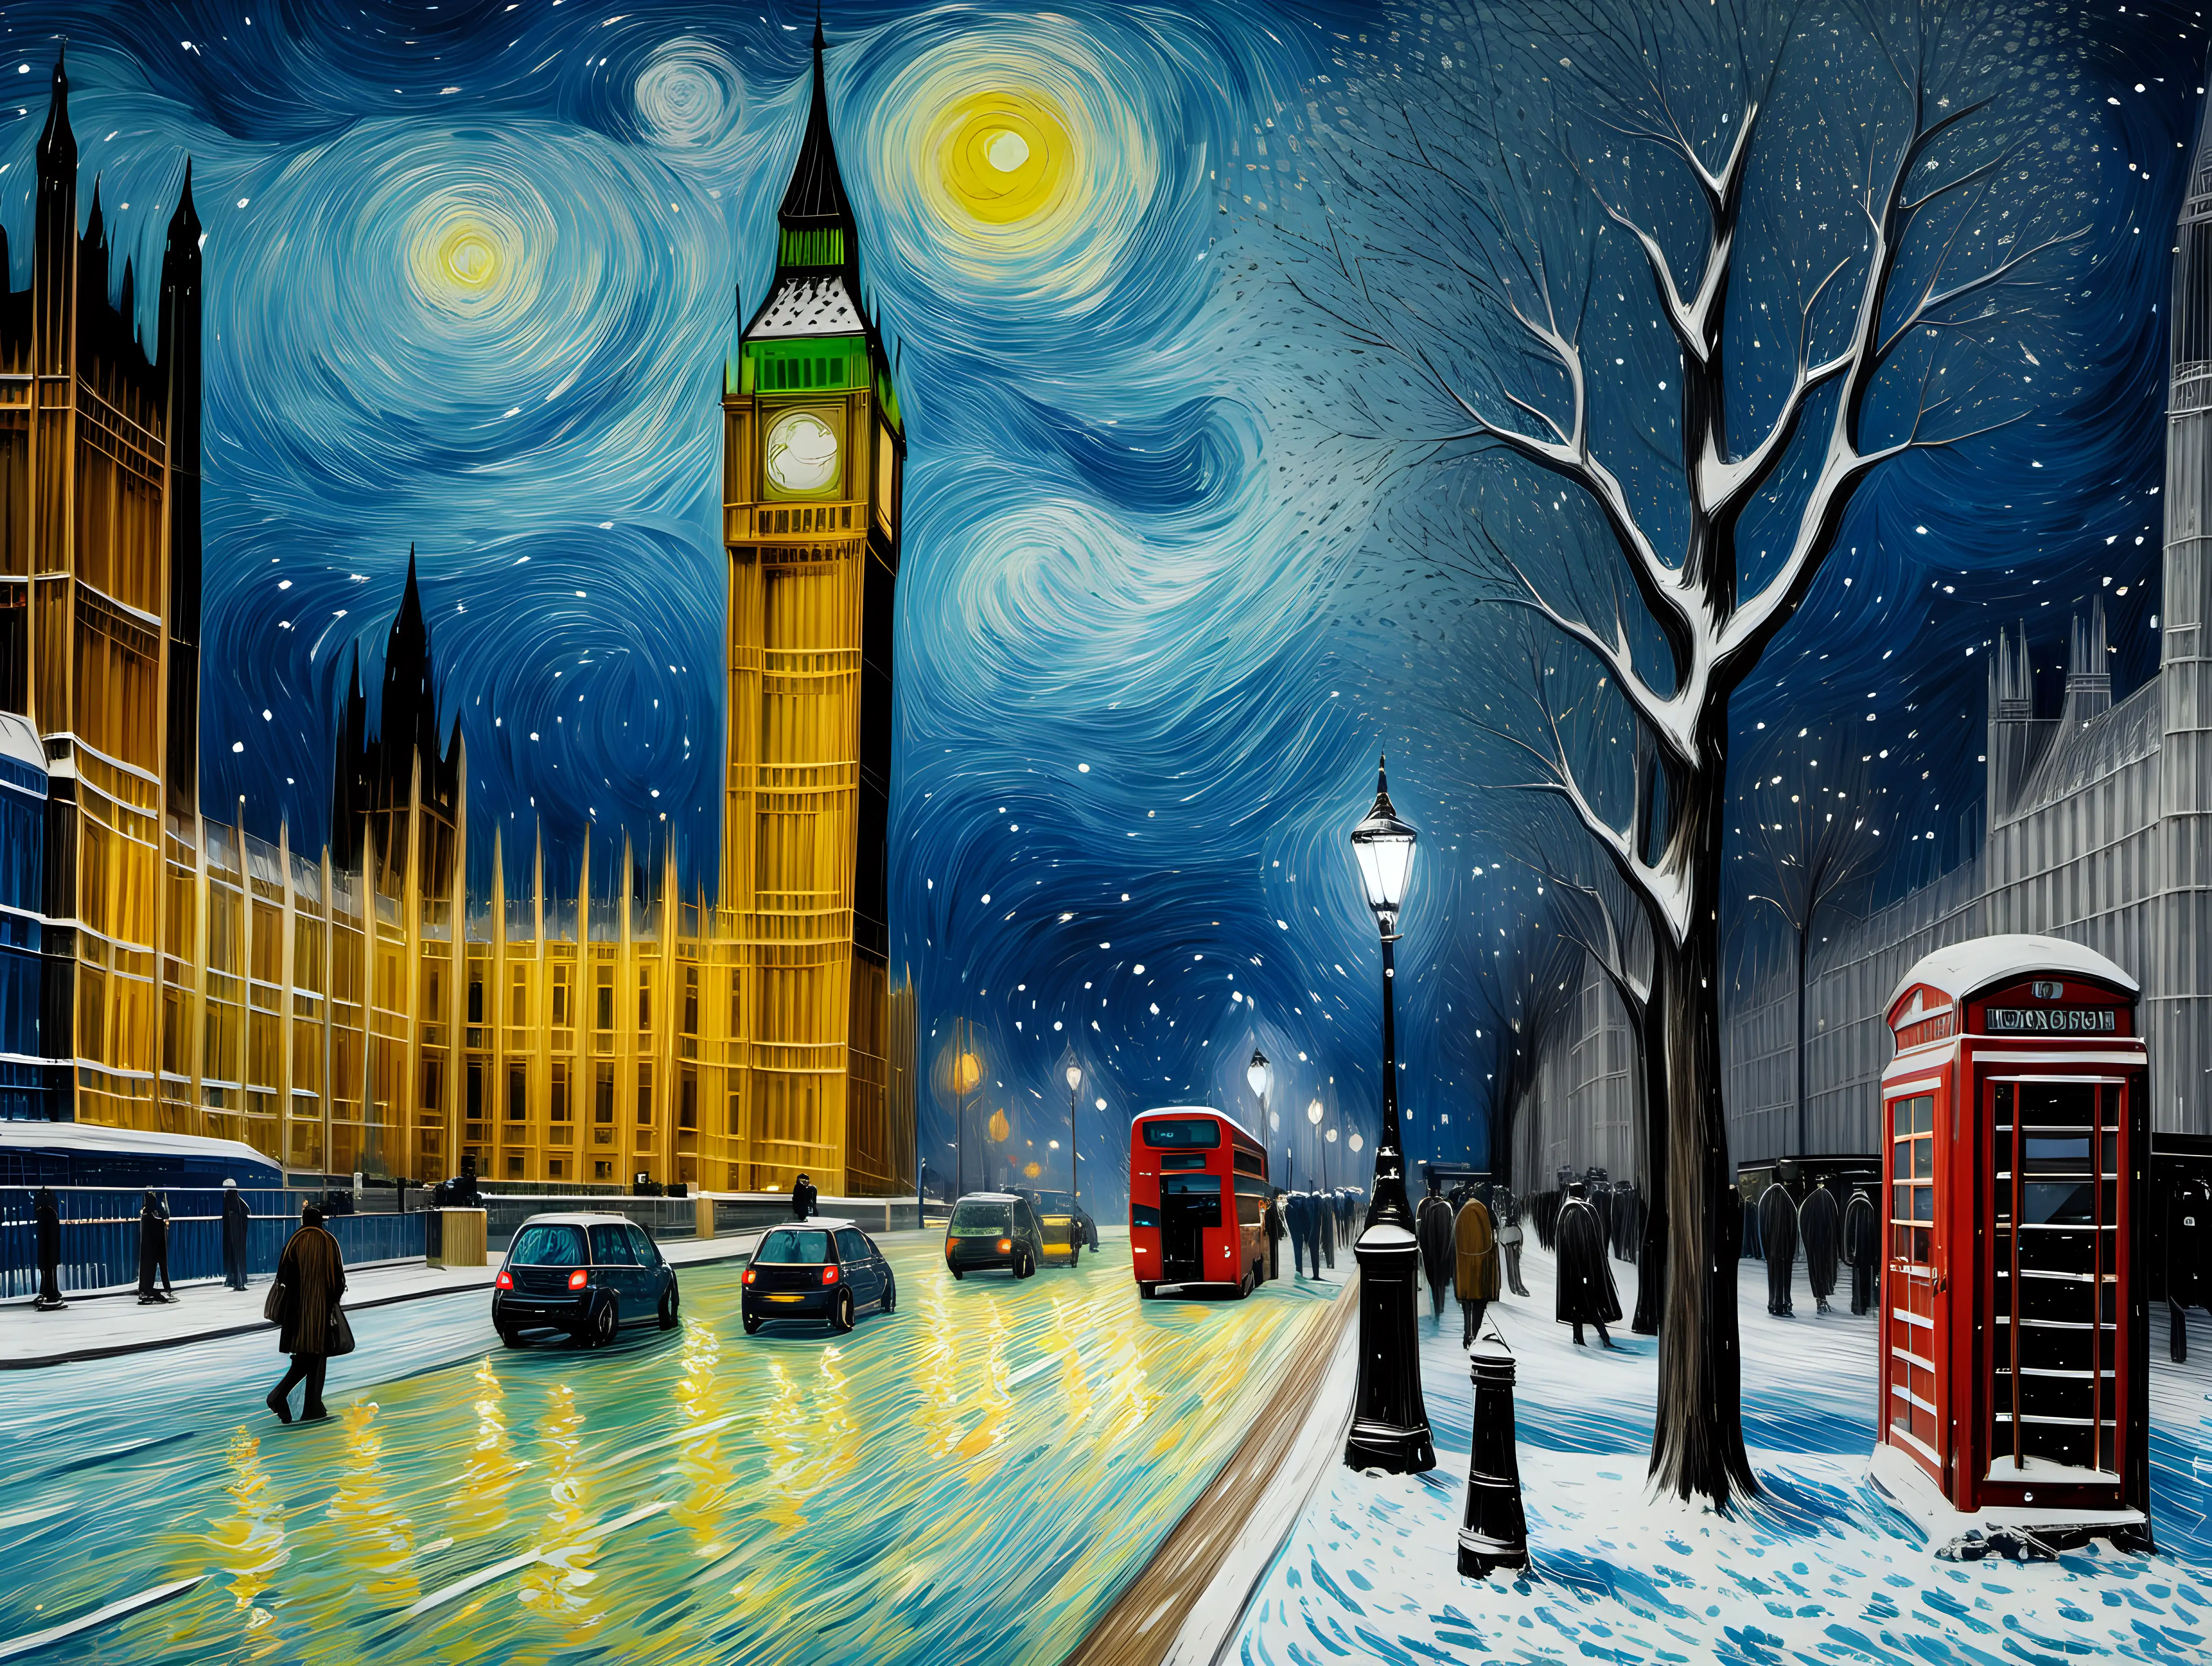 Van Gogh Style Snowing Scene Iconic Westminster Parliament Street